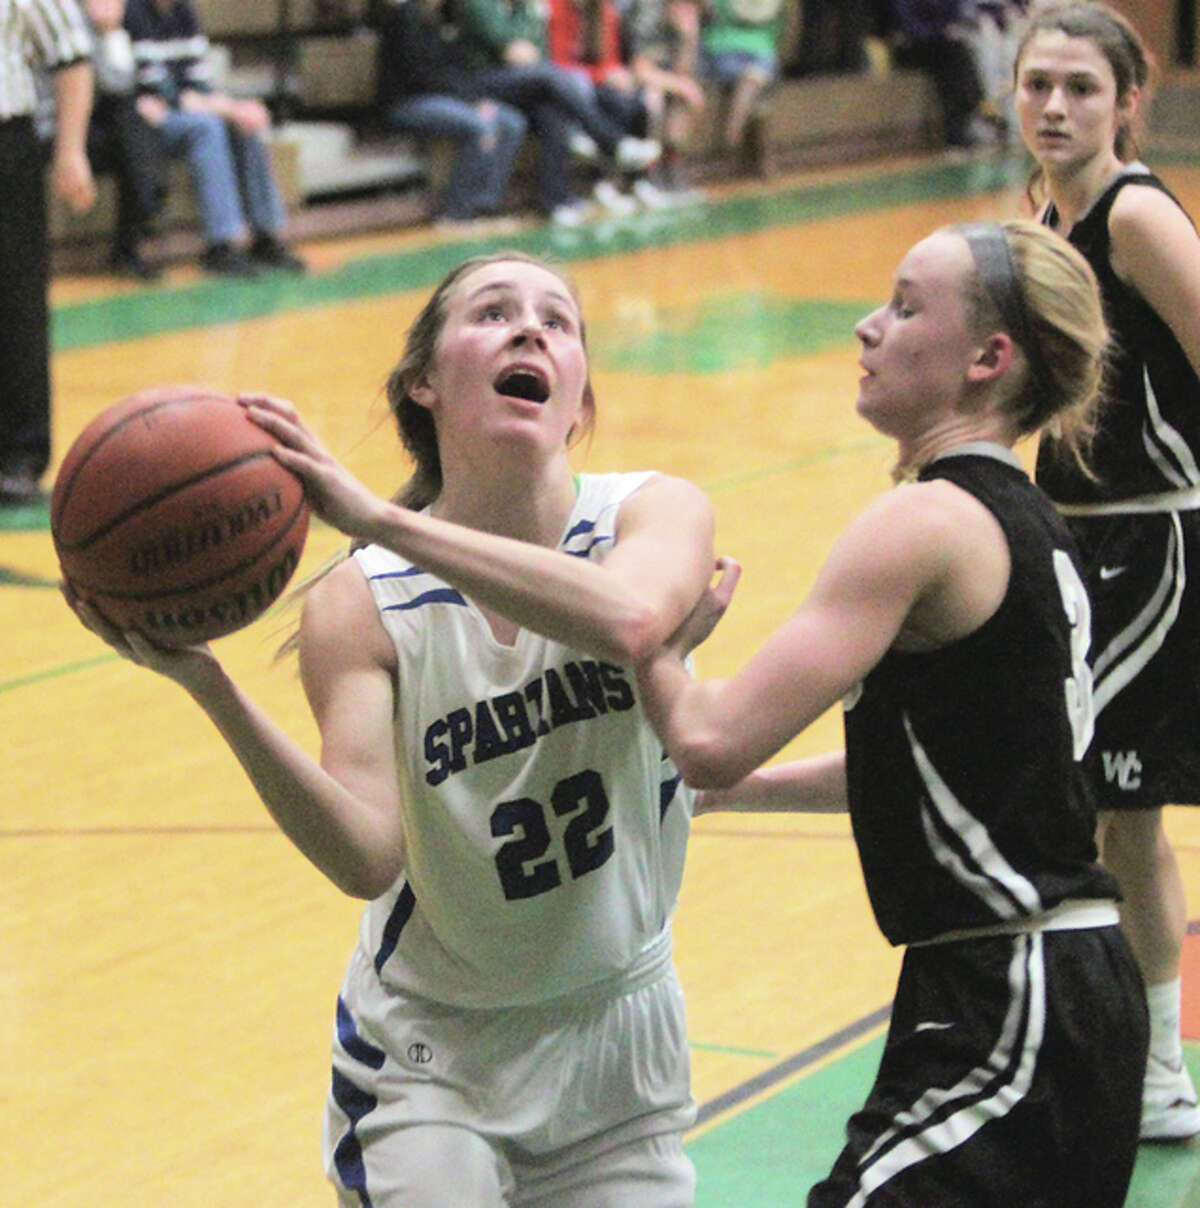 North Greene’s Sydney McClenning (22) puts up a shot over a West Central defender in Tuesday’s quarterfinals at the Carrollton Tournament. The 19-5 Spartans came back from that loss to win Friday night and get within one victory over their first 20-win season since 1999.